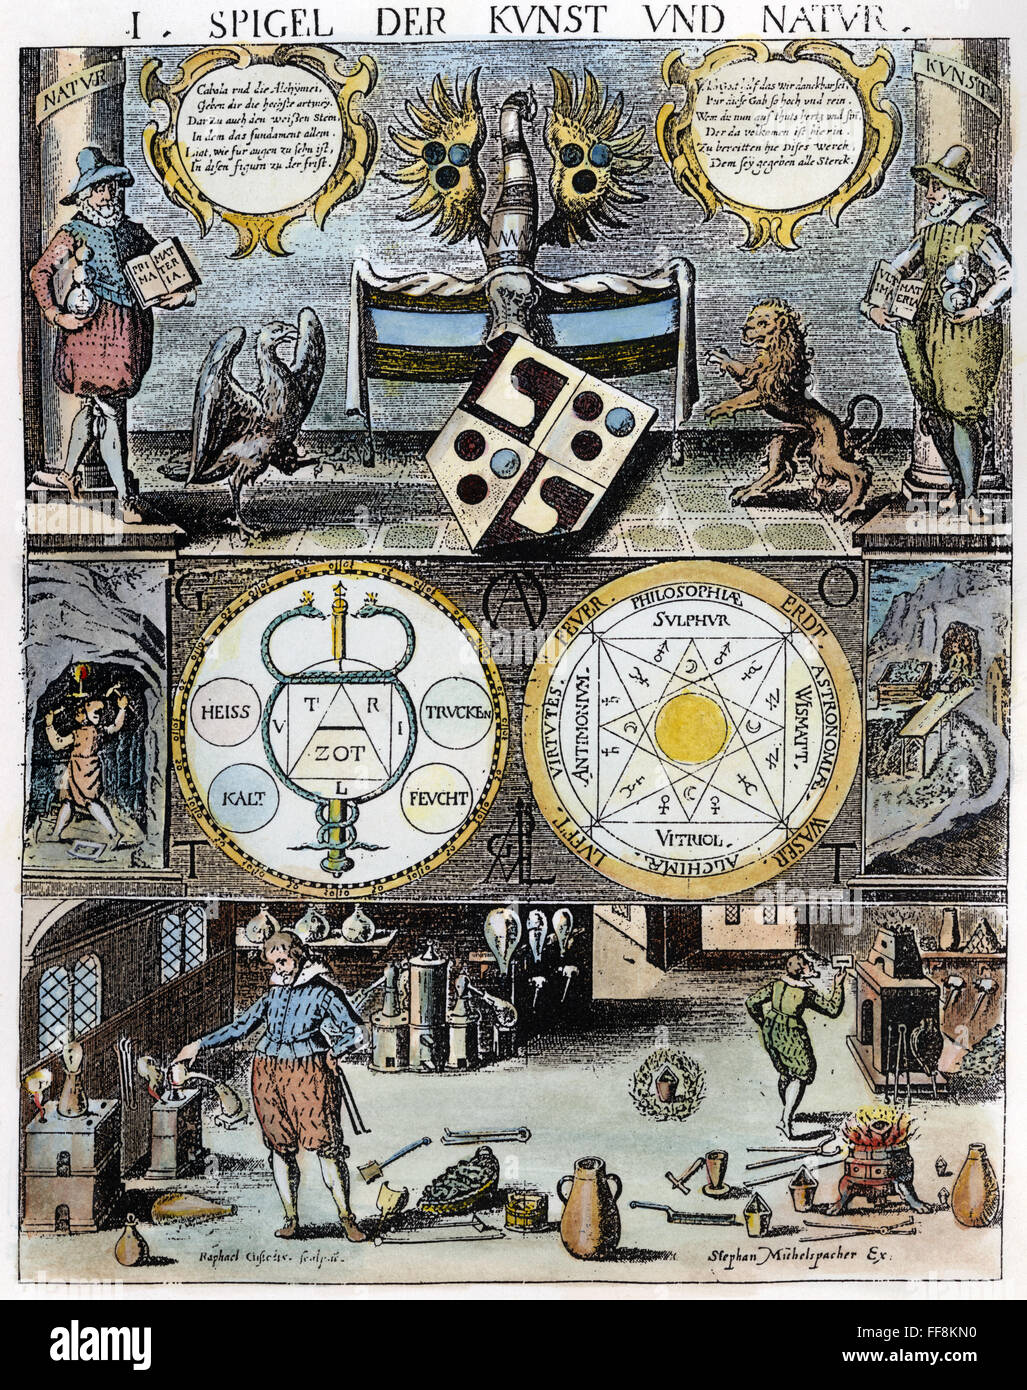 CABALA, 1658. /nPage from 'Cabala, Speculus Artis,' published in 1658 at Augsburg, depicting the four elements at center right and two alchemists in their laboratory. Stock Photo